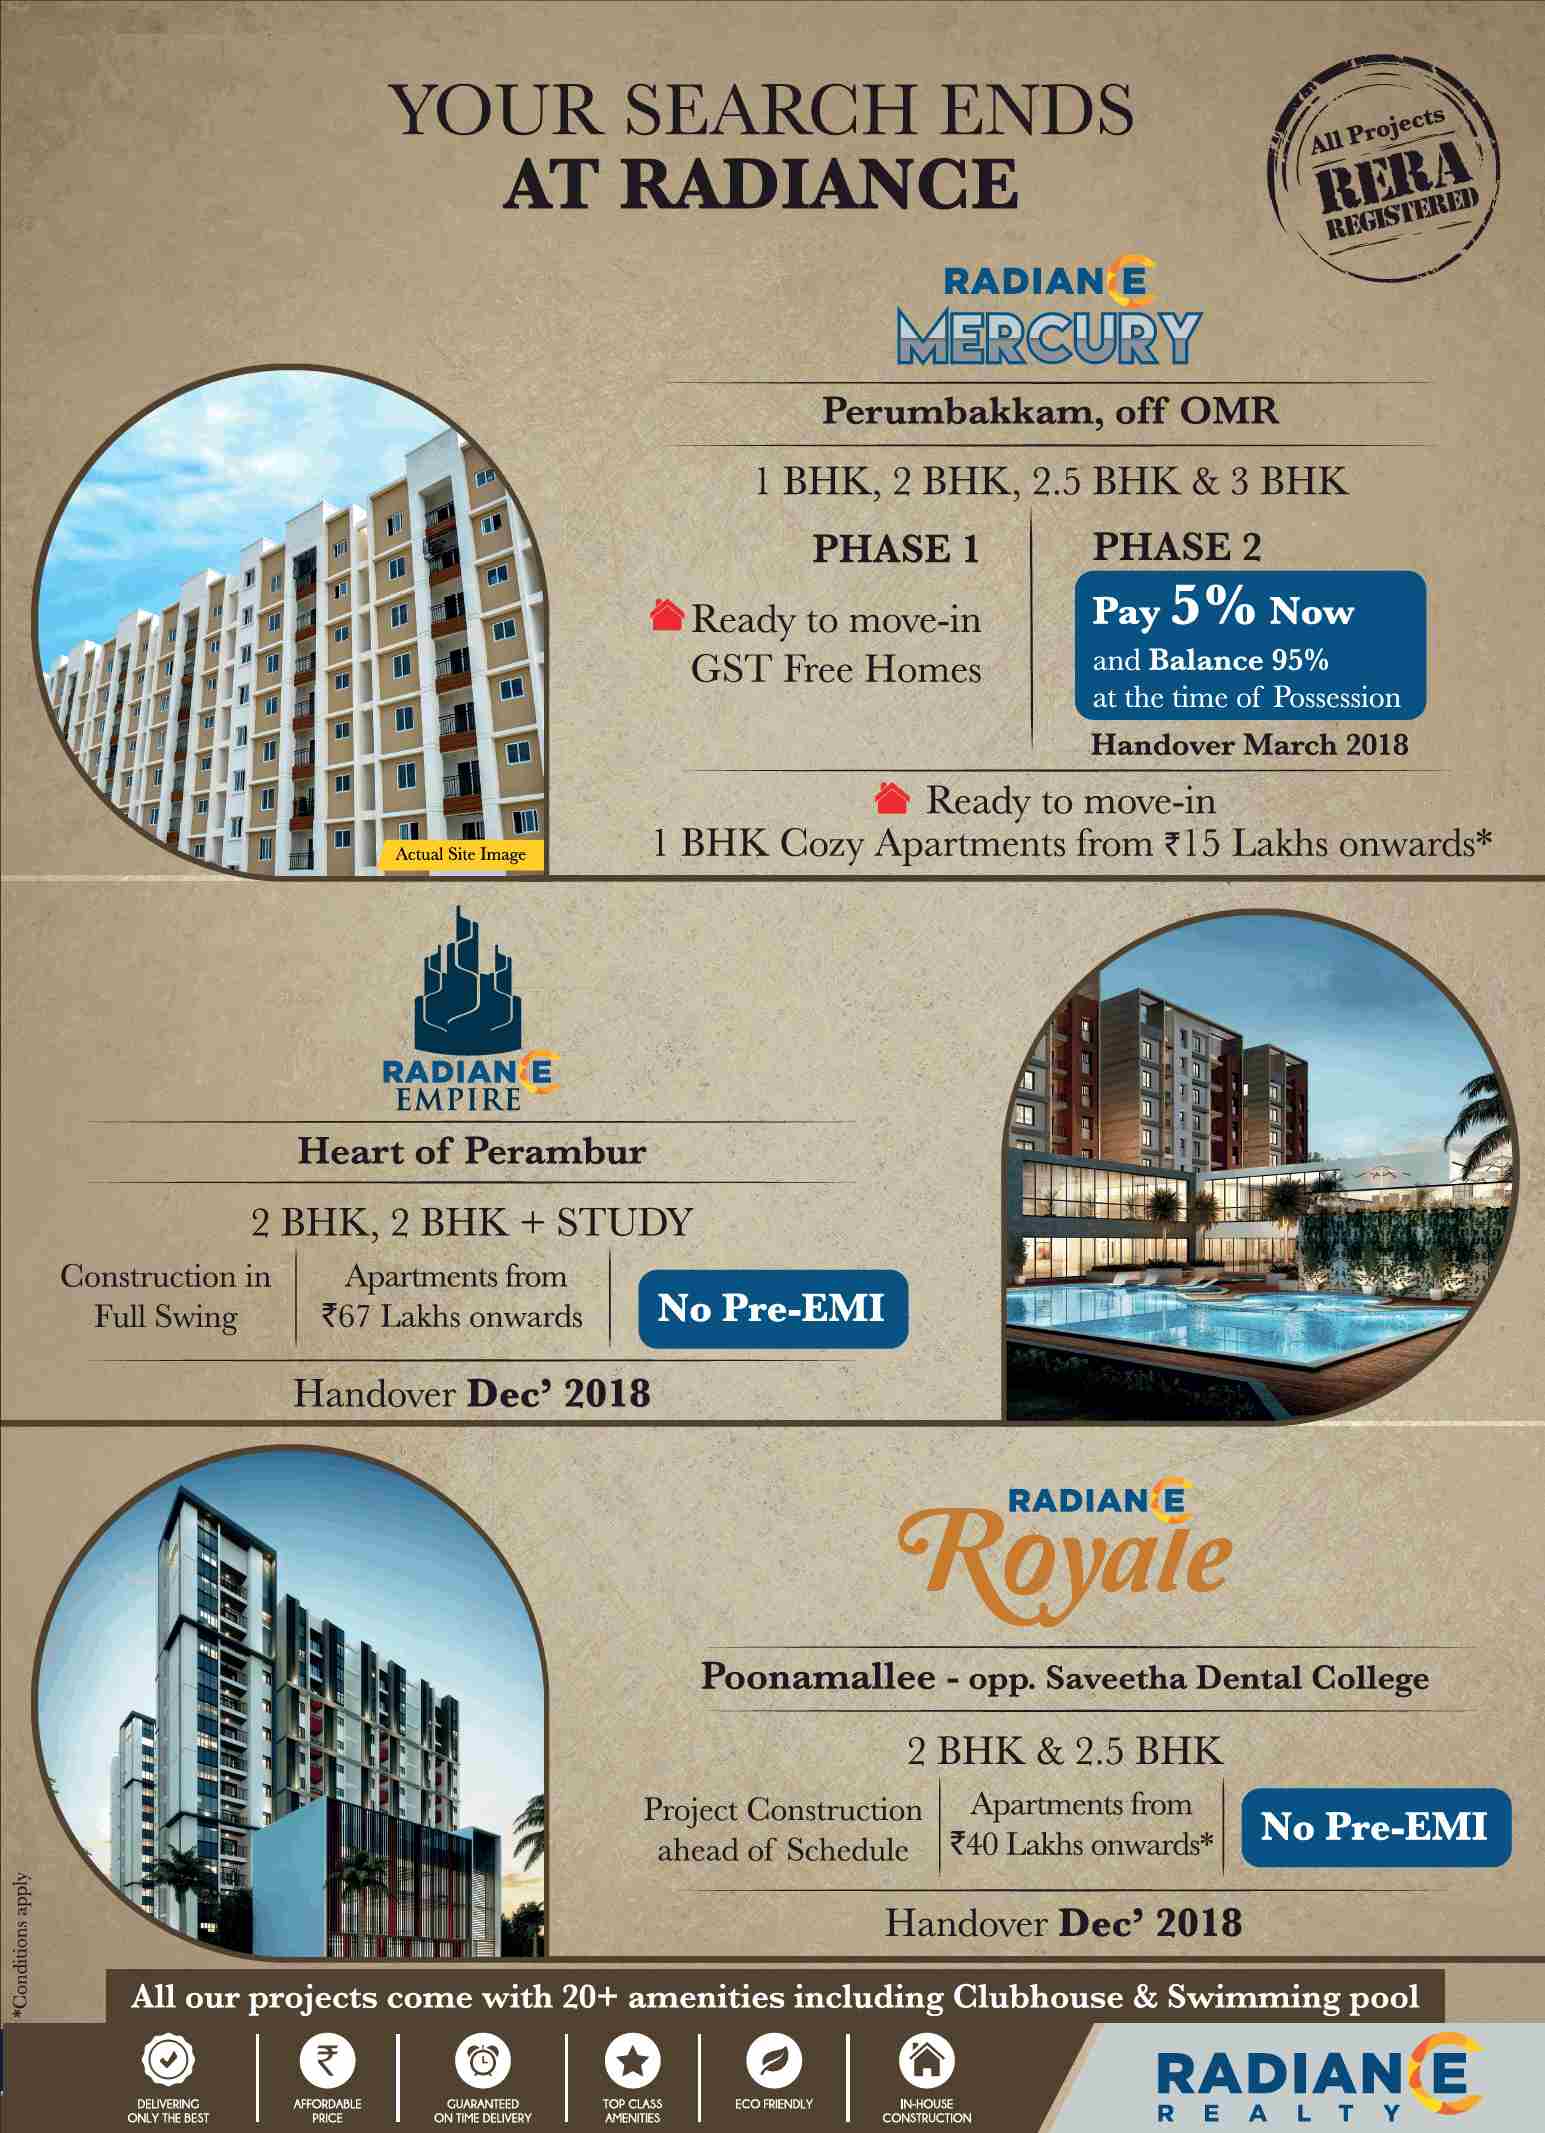 Invest on Radiance properties in Chennai Update